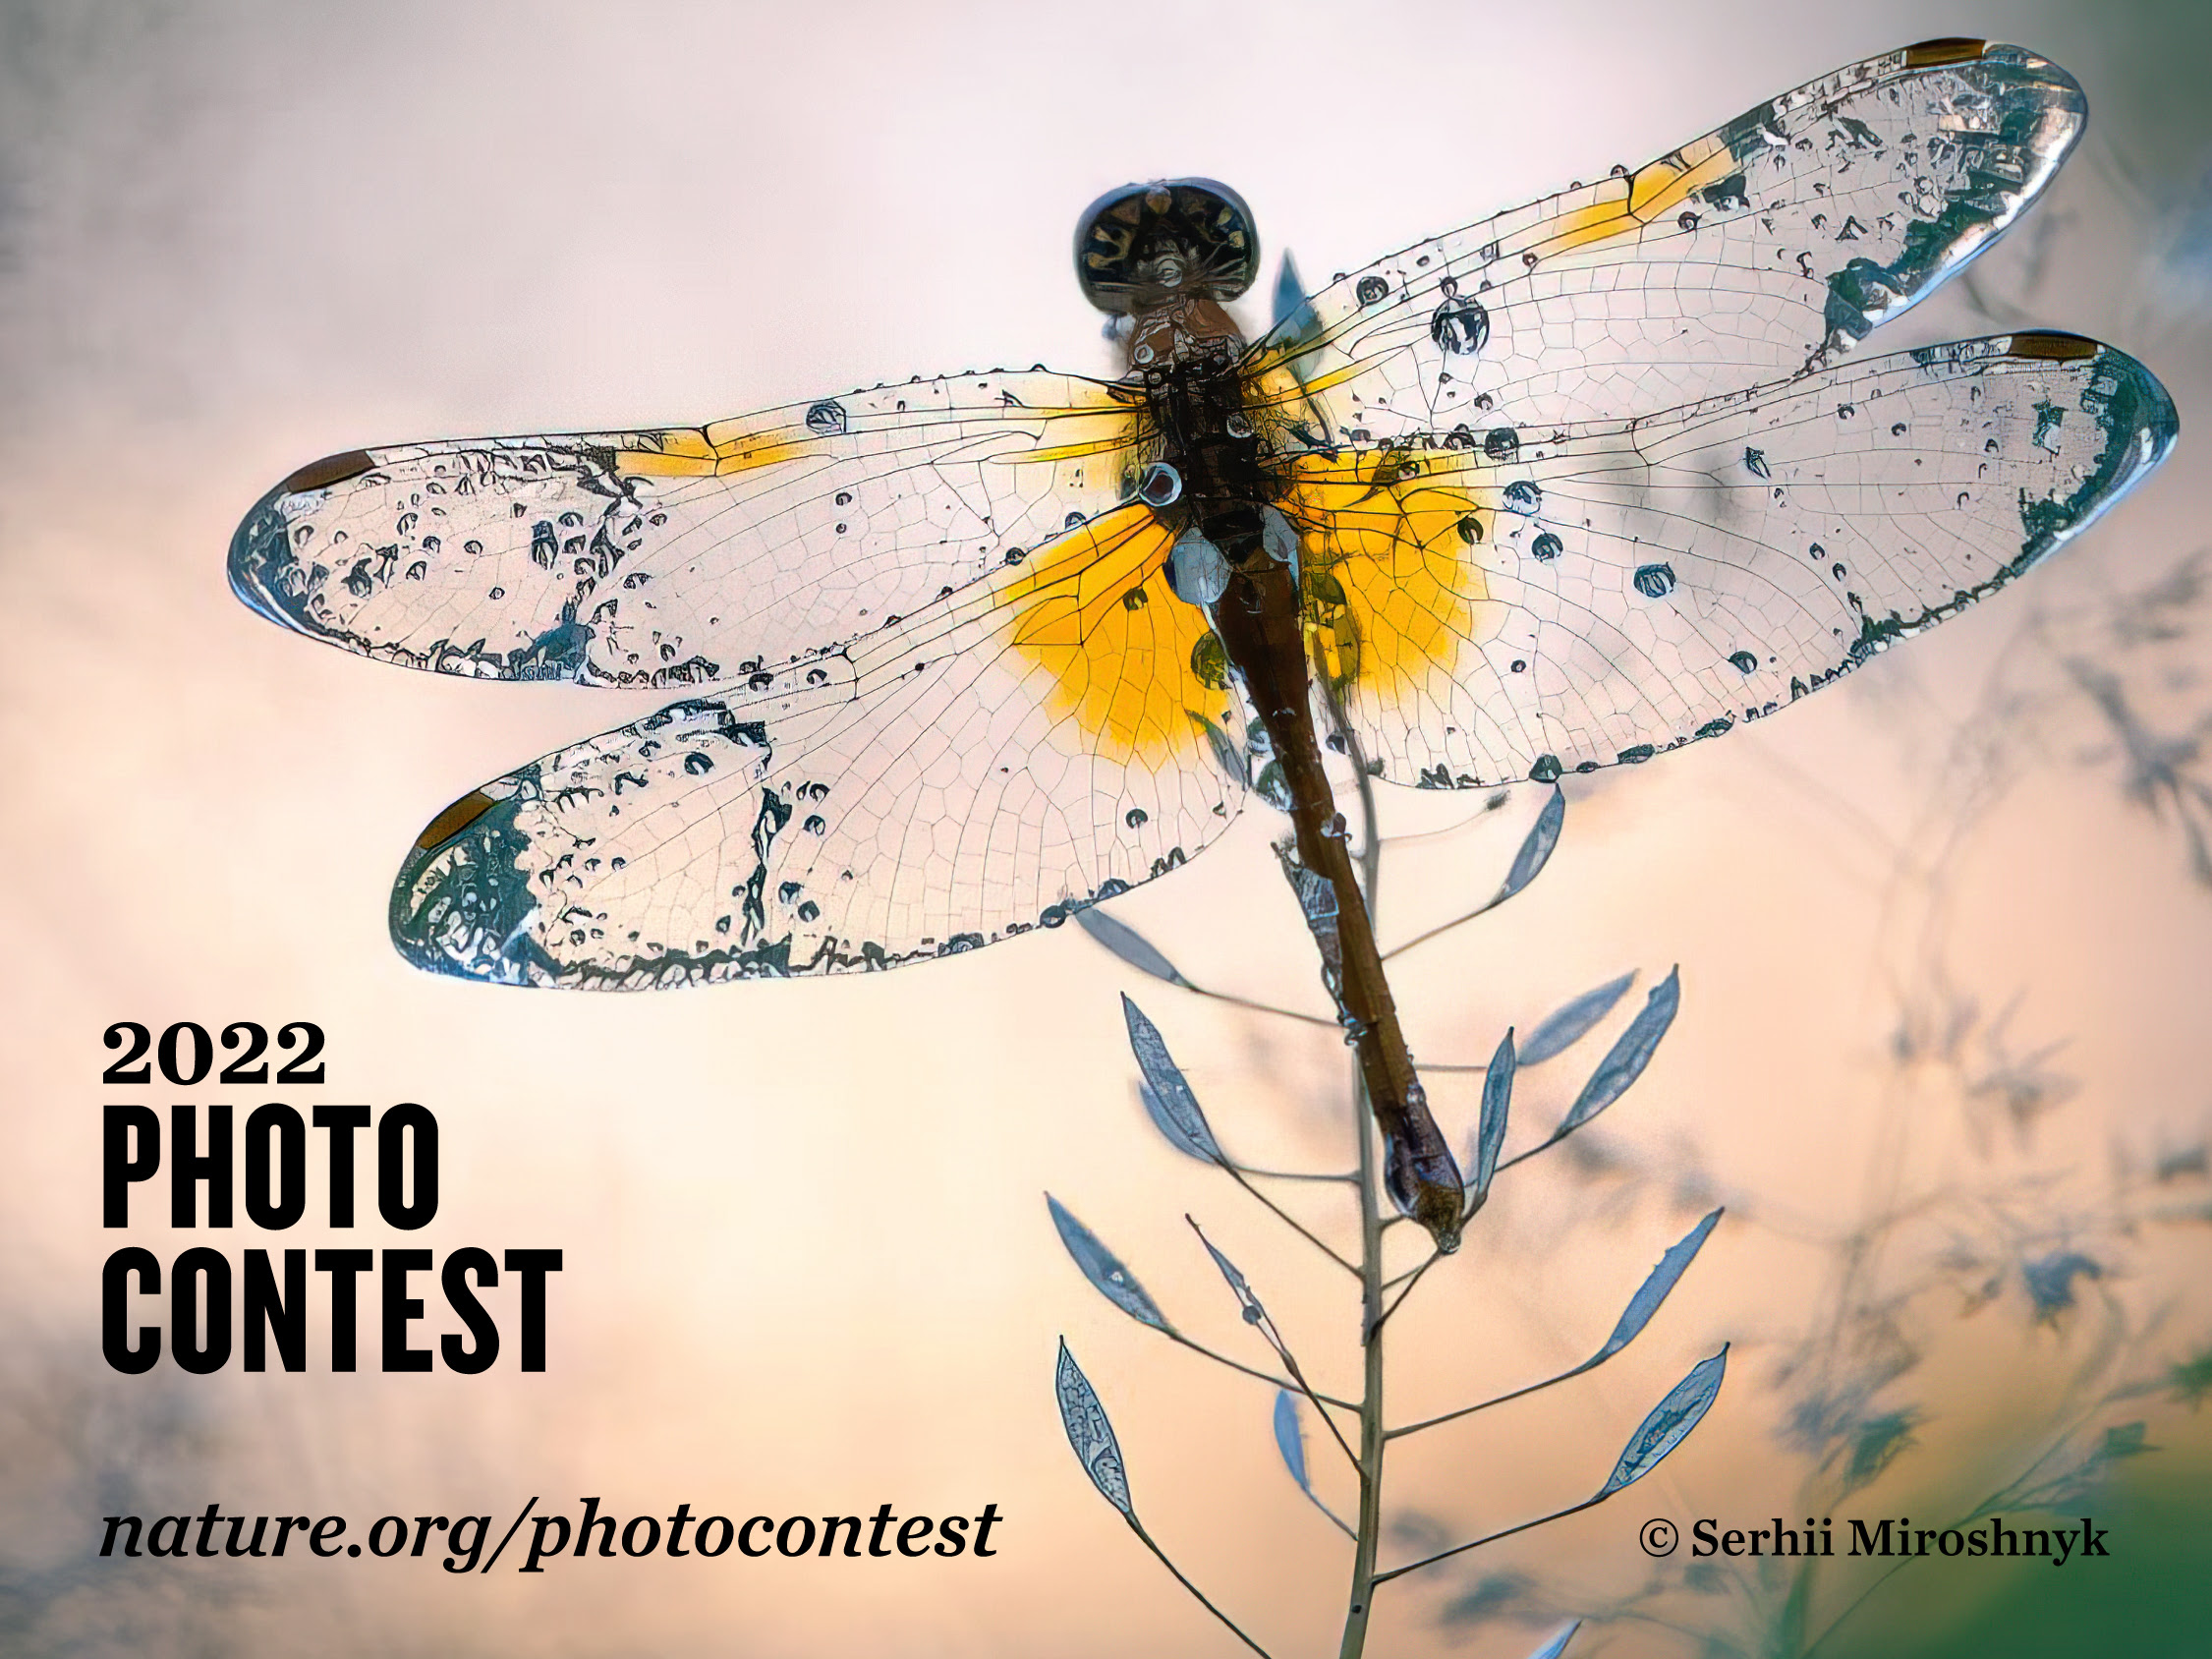 A dragon fly with seemingly crystalline wings with amber pigmentation sits on a shepherd's purse plant. Text reads 2022 Photo Contest nature.org/photocontest © undefined